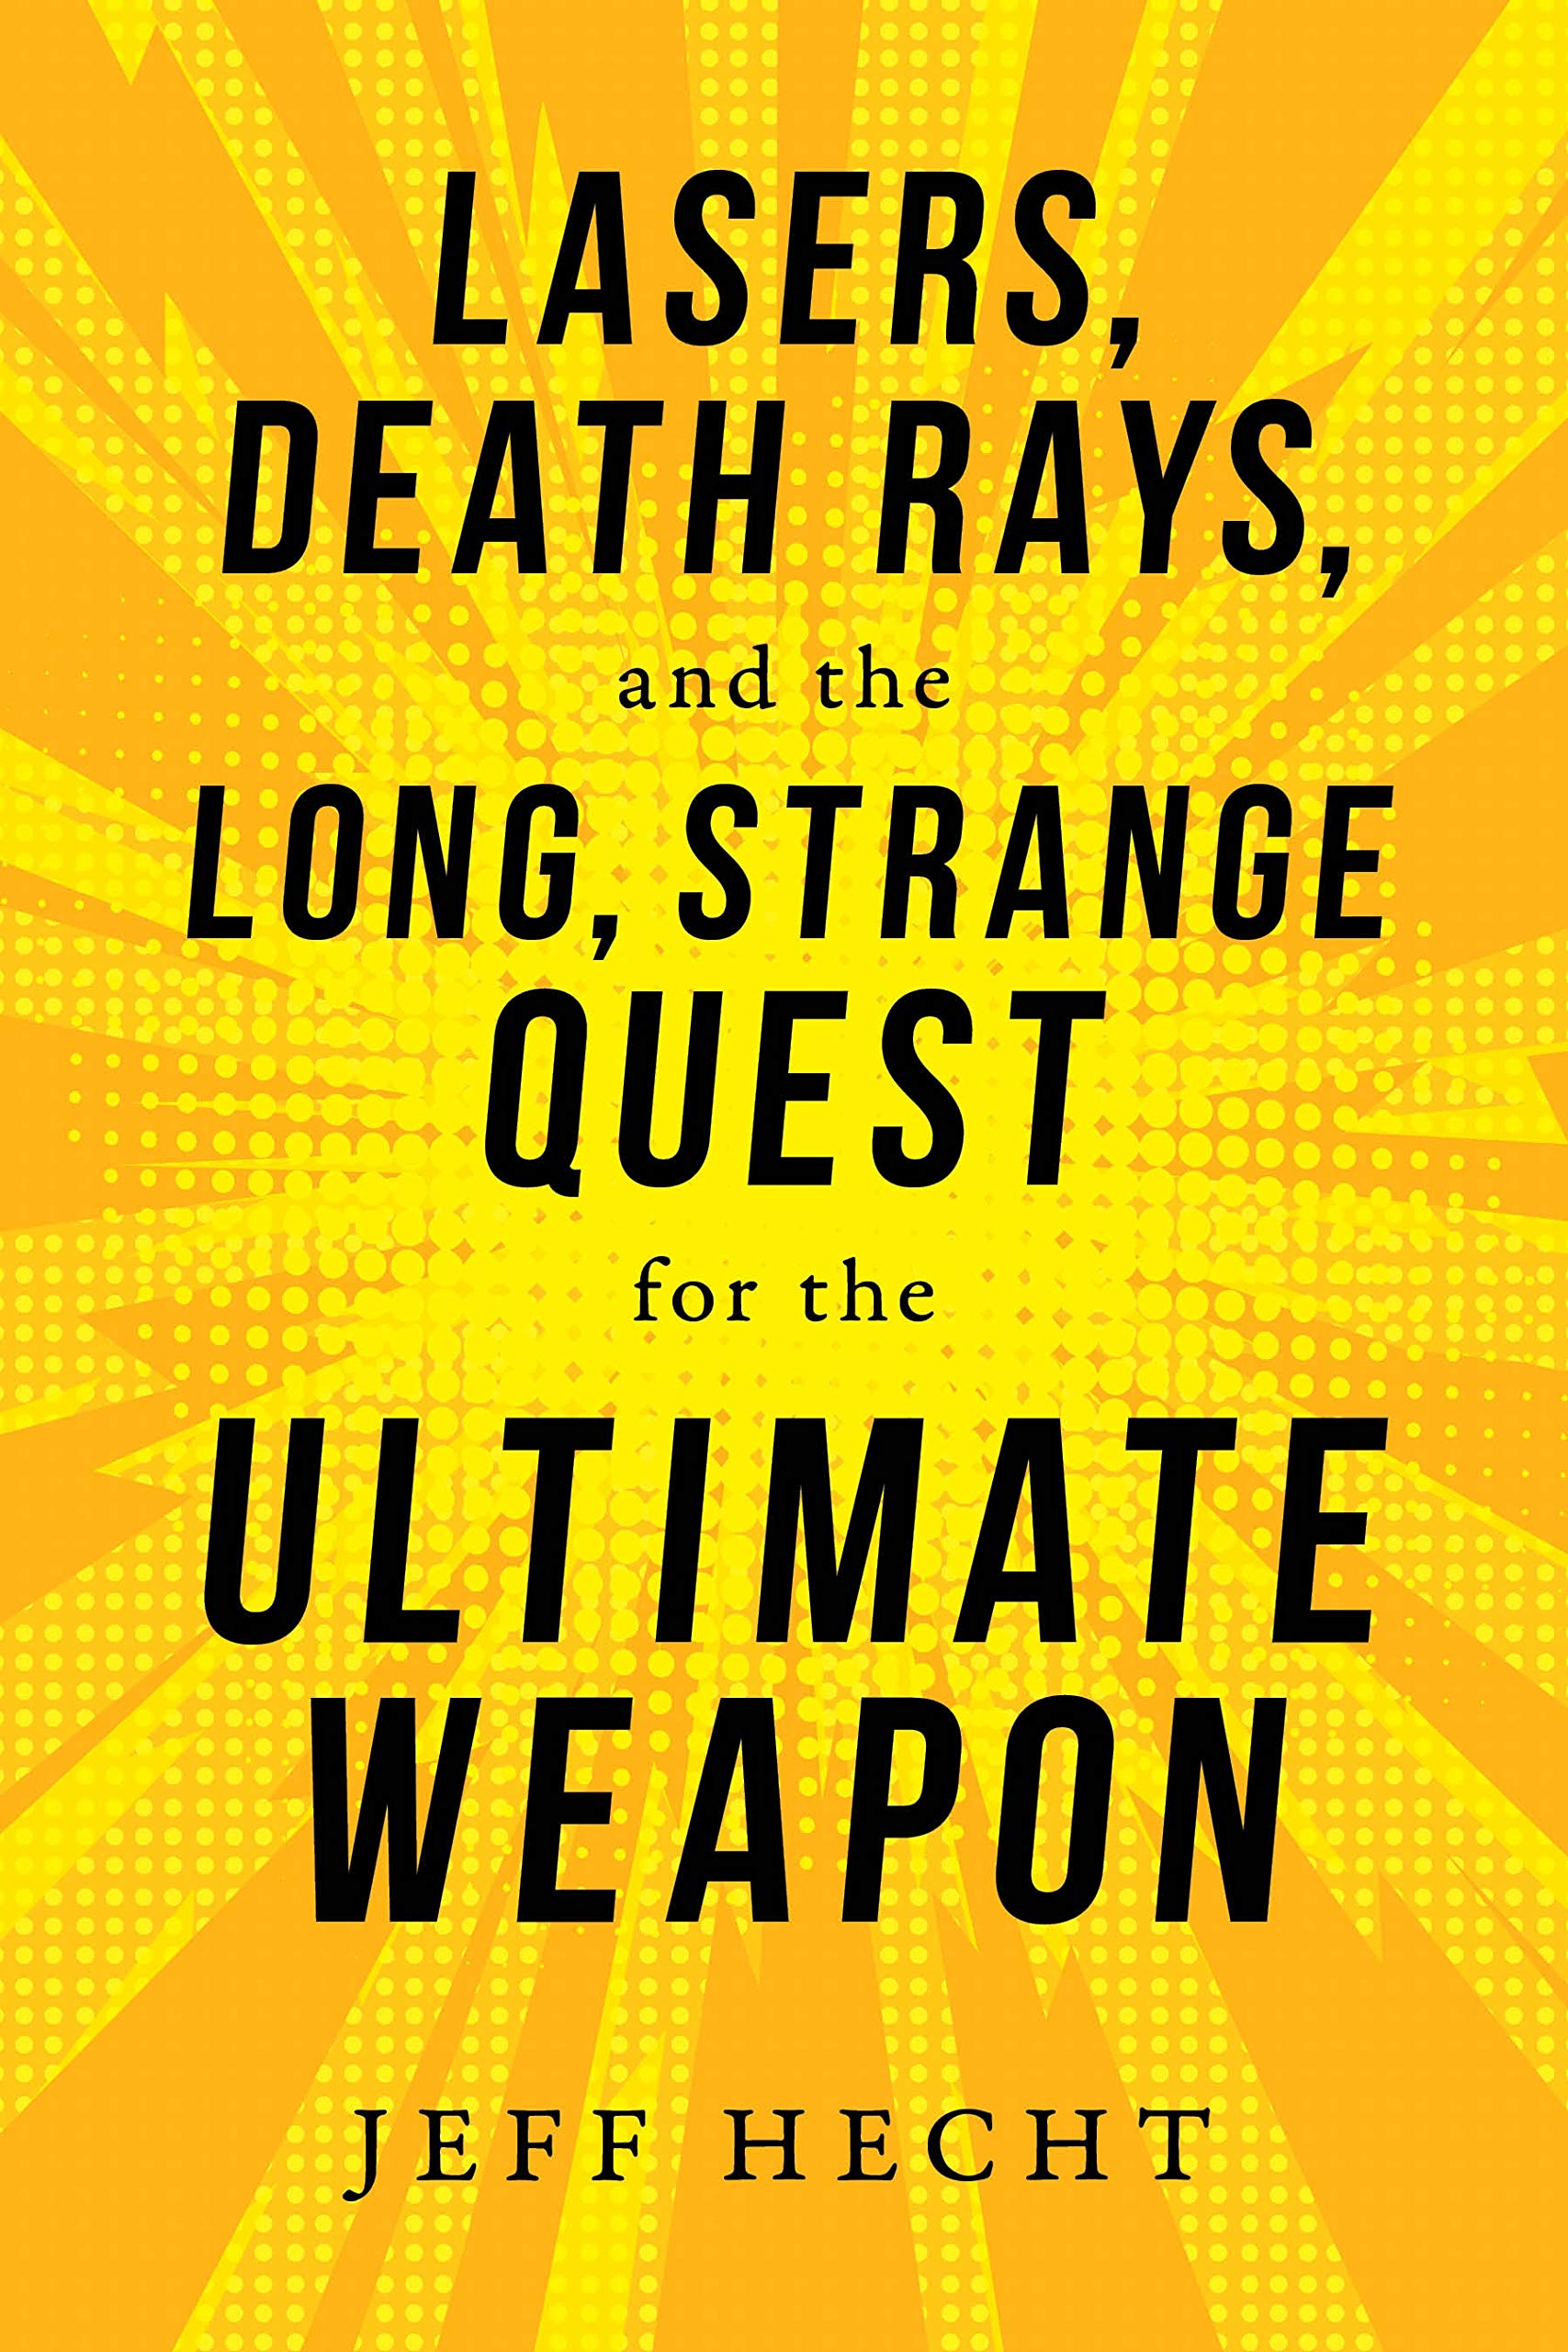 Lasers, Death Rays, and the Long, Strange Quest for the Ultimate Weapon